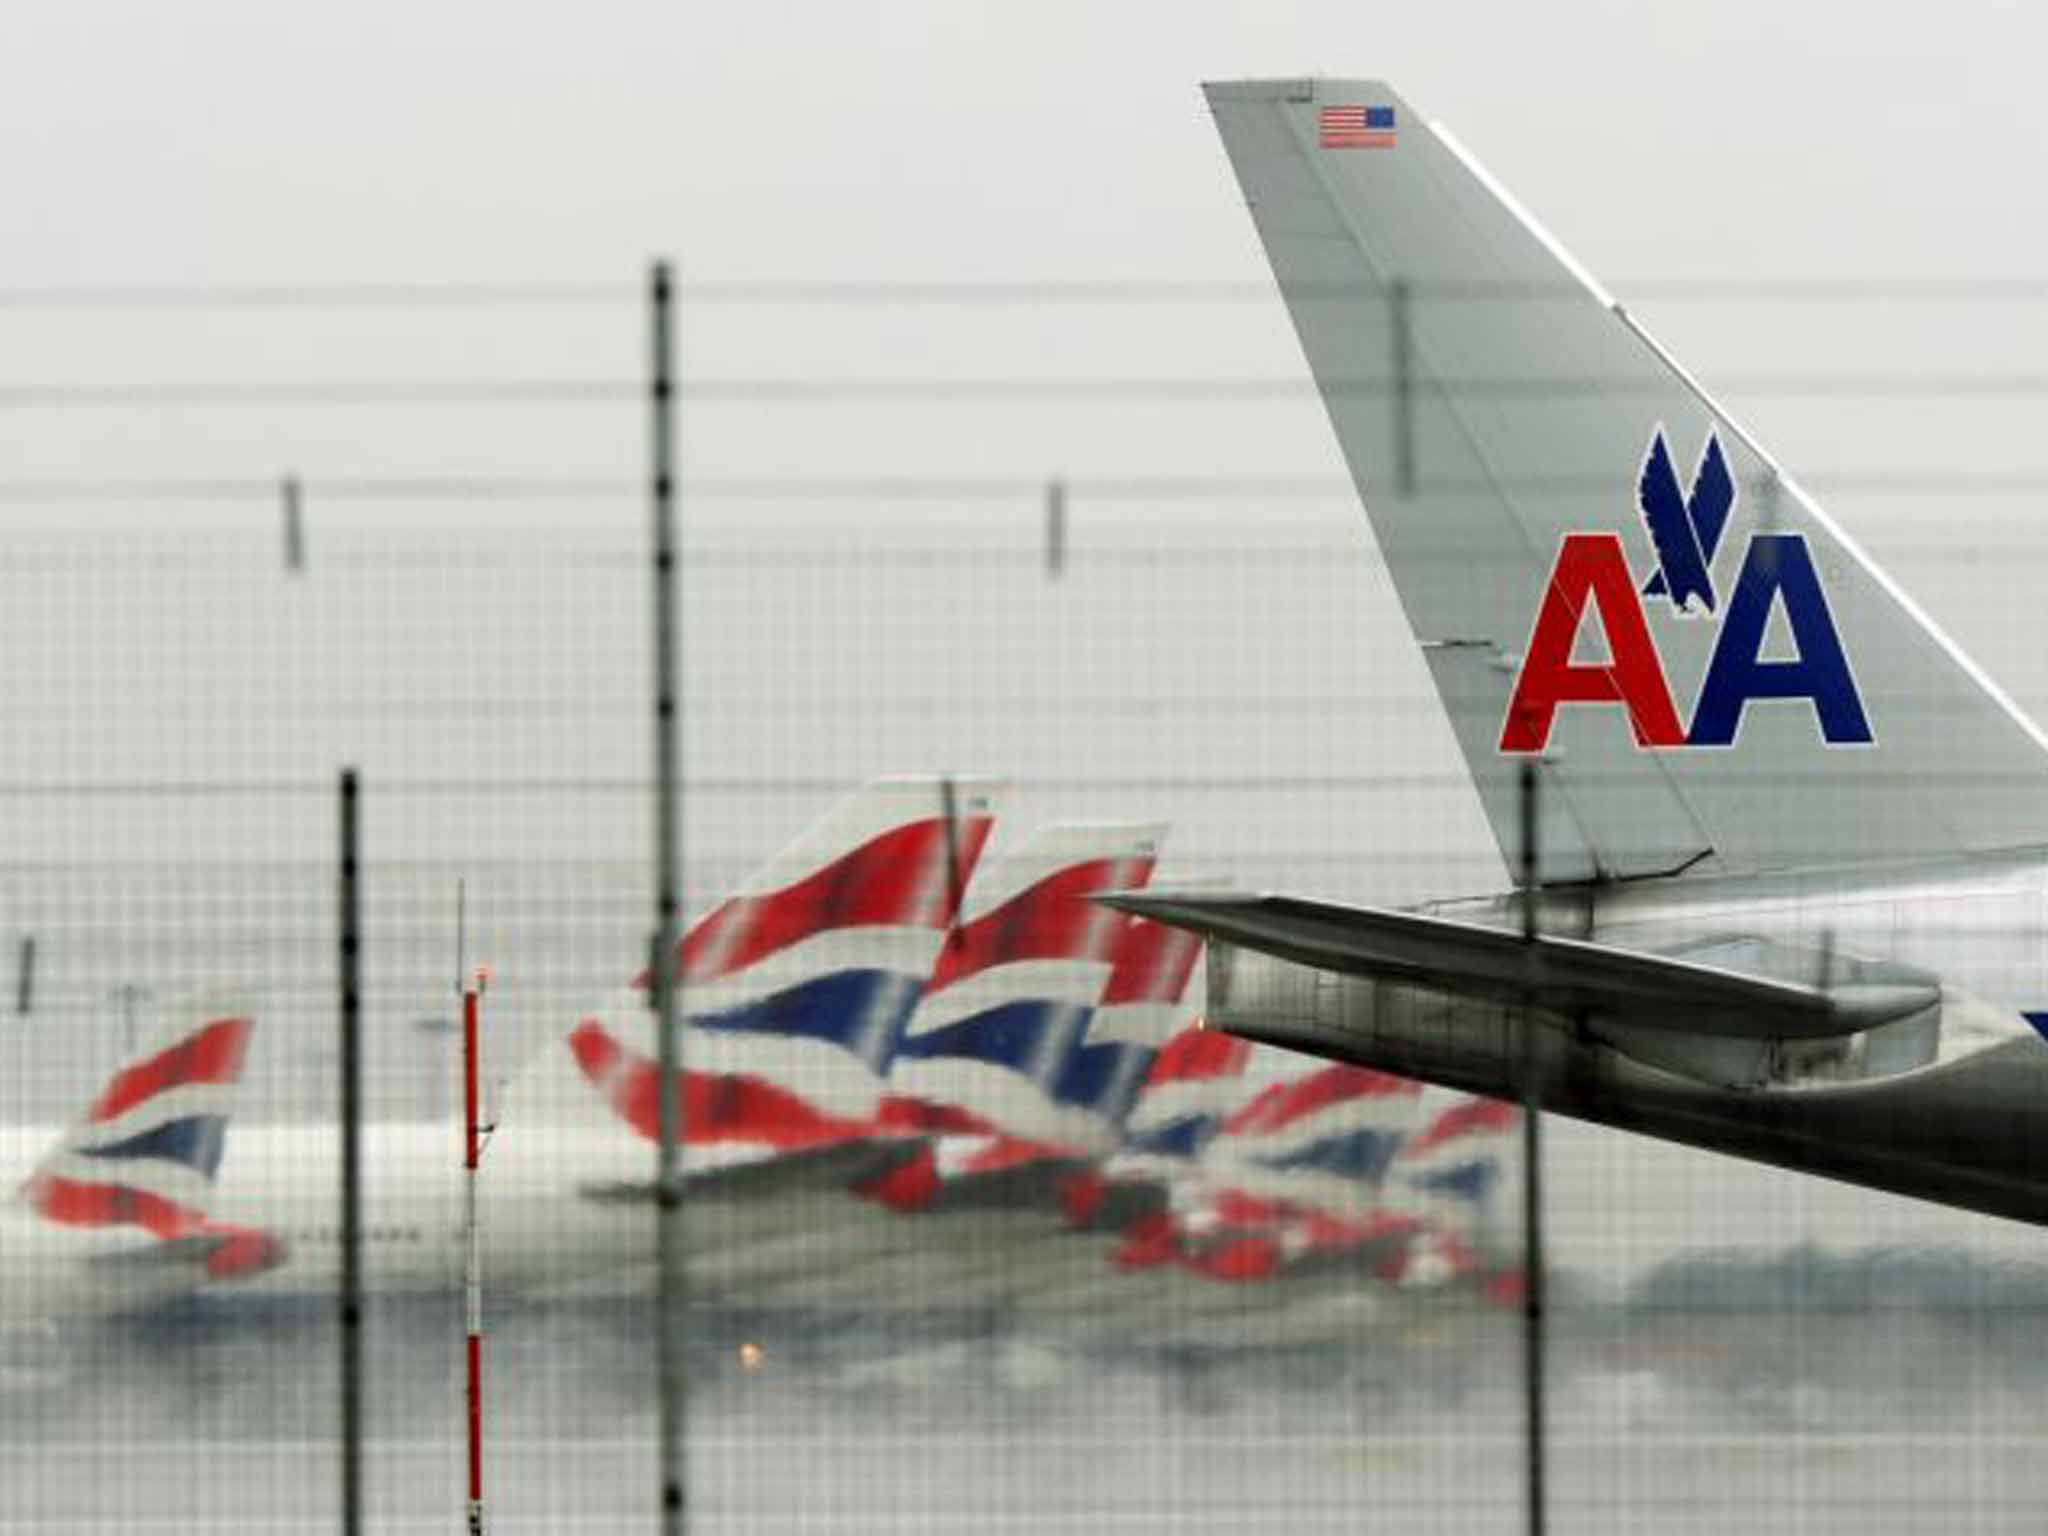 Partner airlines: AA and BA